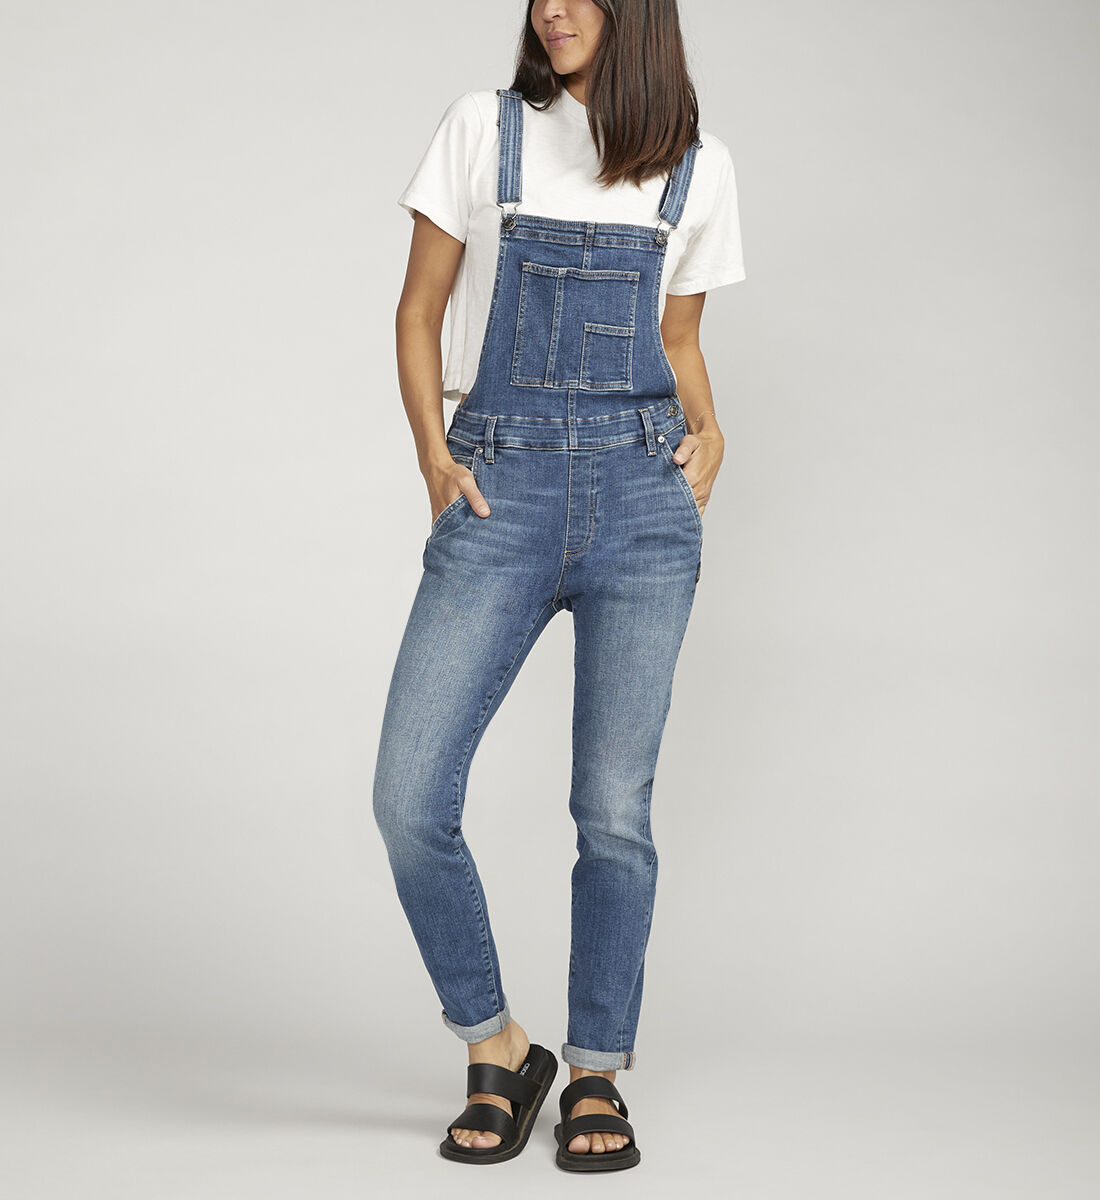 Buy Skinny Leg Overalls for USD 98.00 | Silver Jeans US New